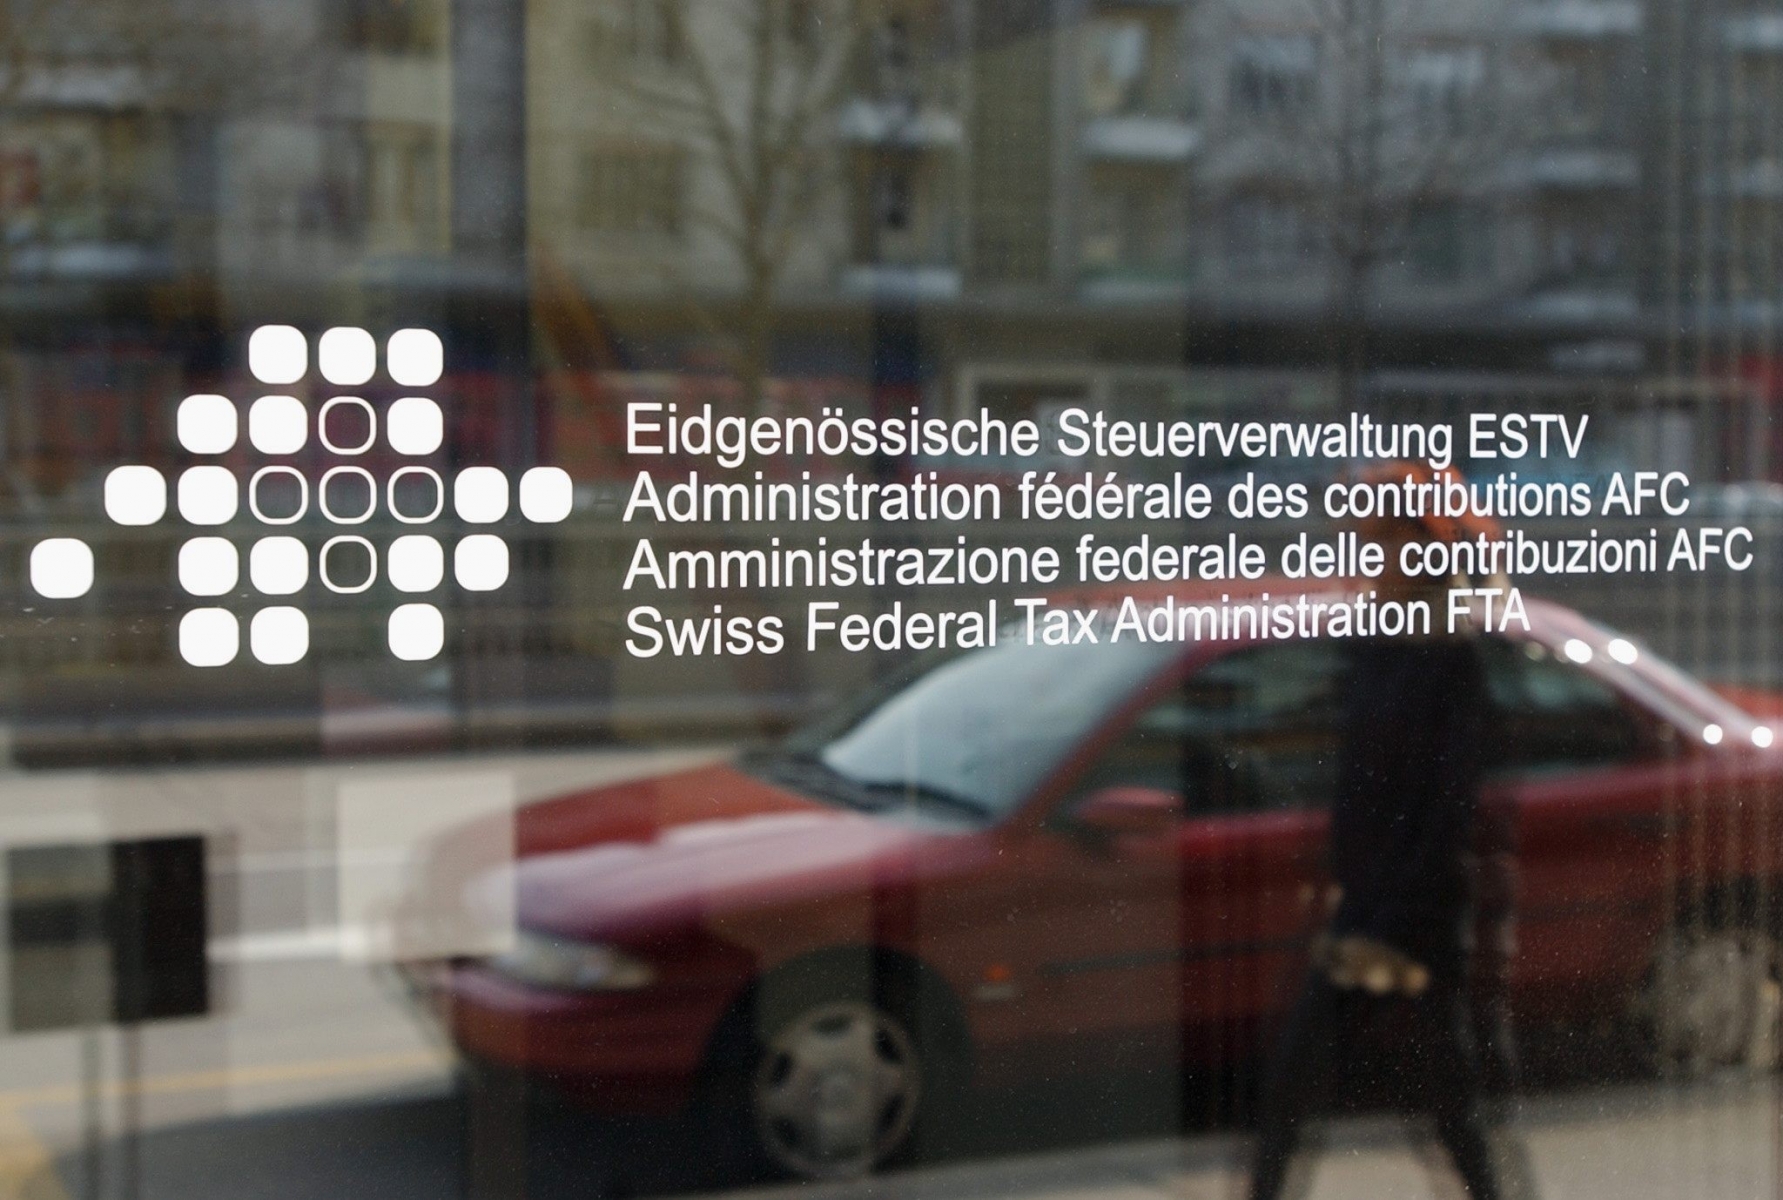 FILE ñ A file photograph showing the entrance of the Swiss federal tax administration in Bern, Switzerland, pictured on April 14, 2004. According to news on Tuesday July 05, 2016, UBS Group AG has been ordered by the Swiss tax authority to provide information related to a probe by French tax officials. (KEYSTONE/Lukas Lehmann) SWITZERLAND BANK UBS